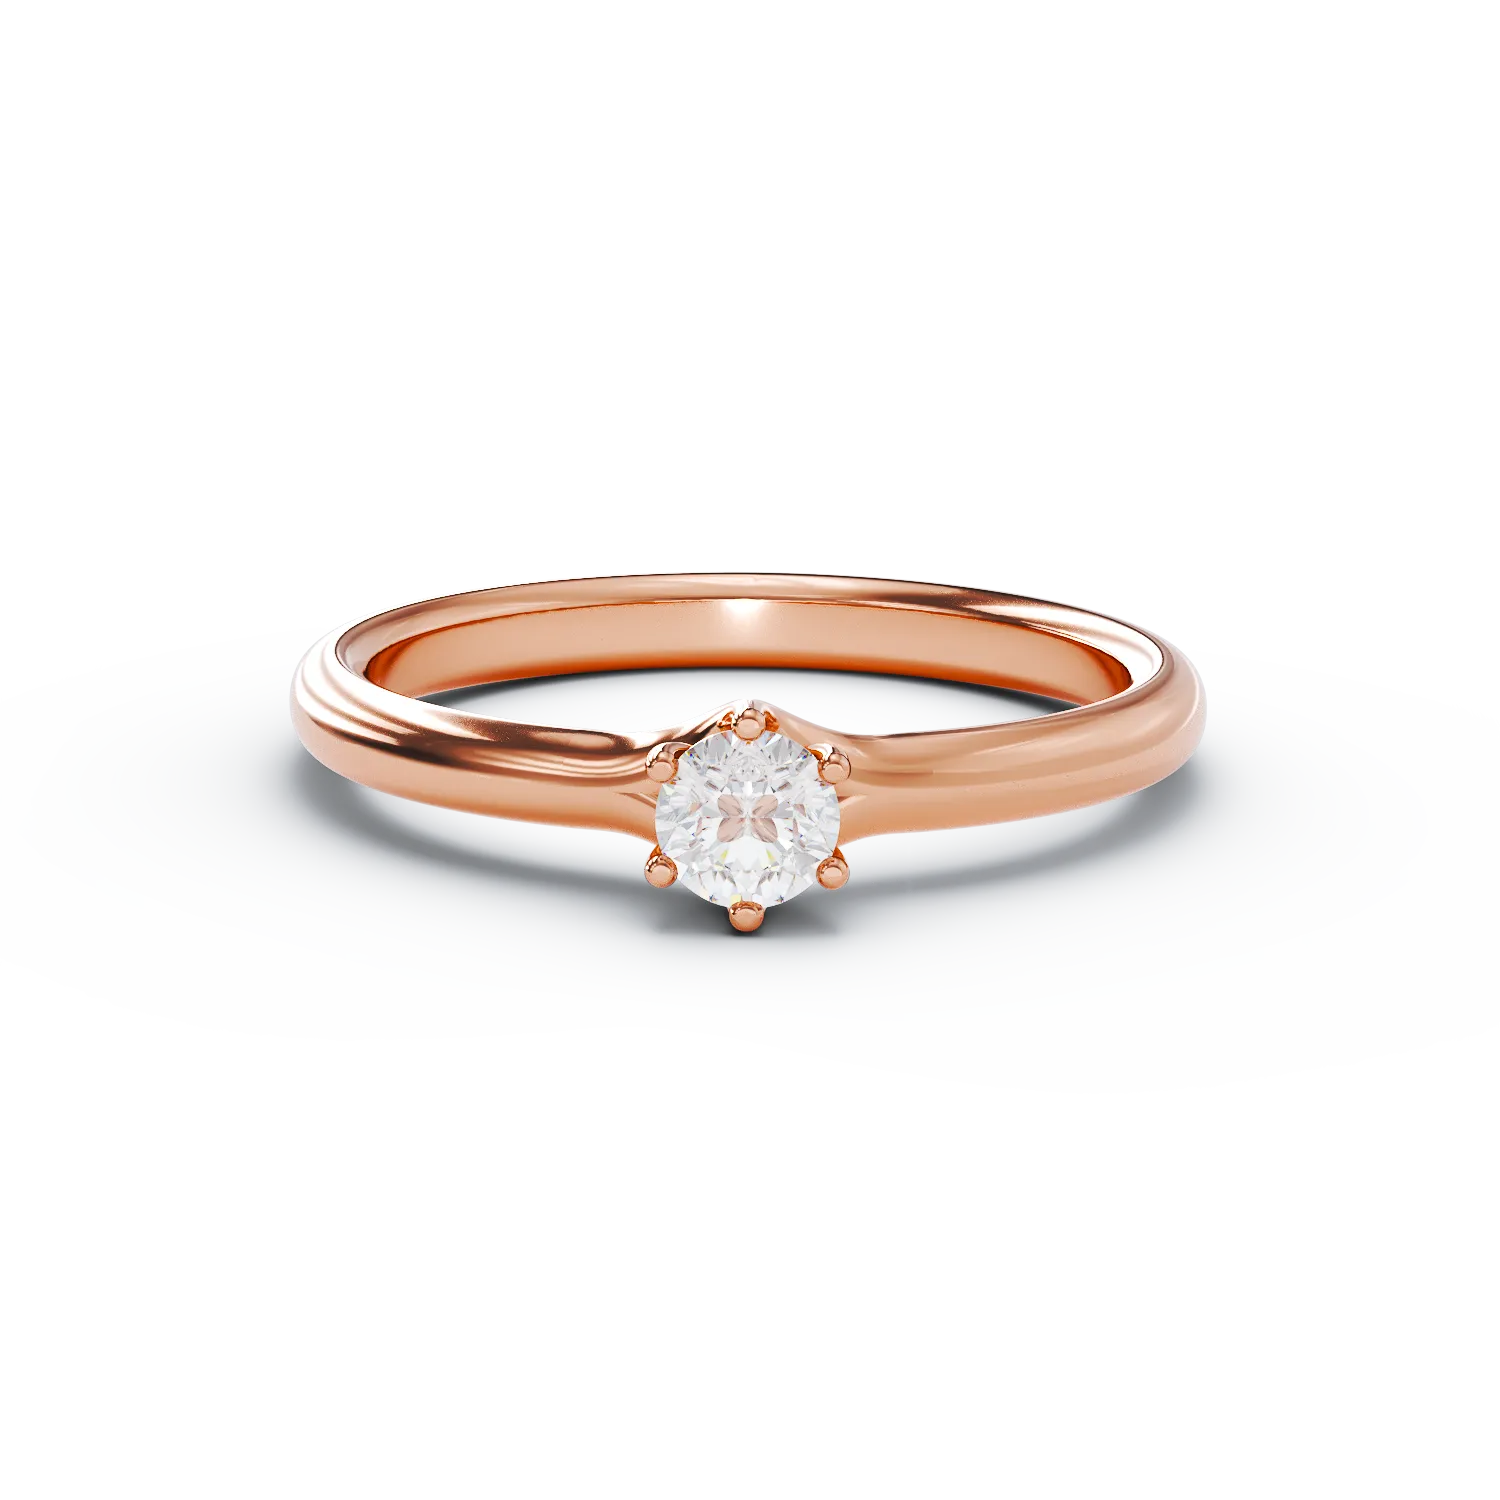 Rose gold engagement ring with 0.2ct solitaire diamond